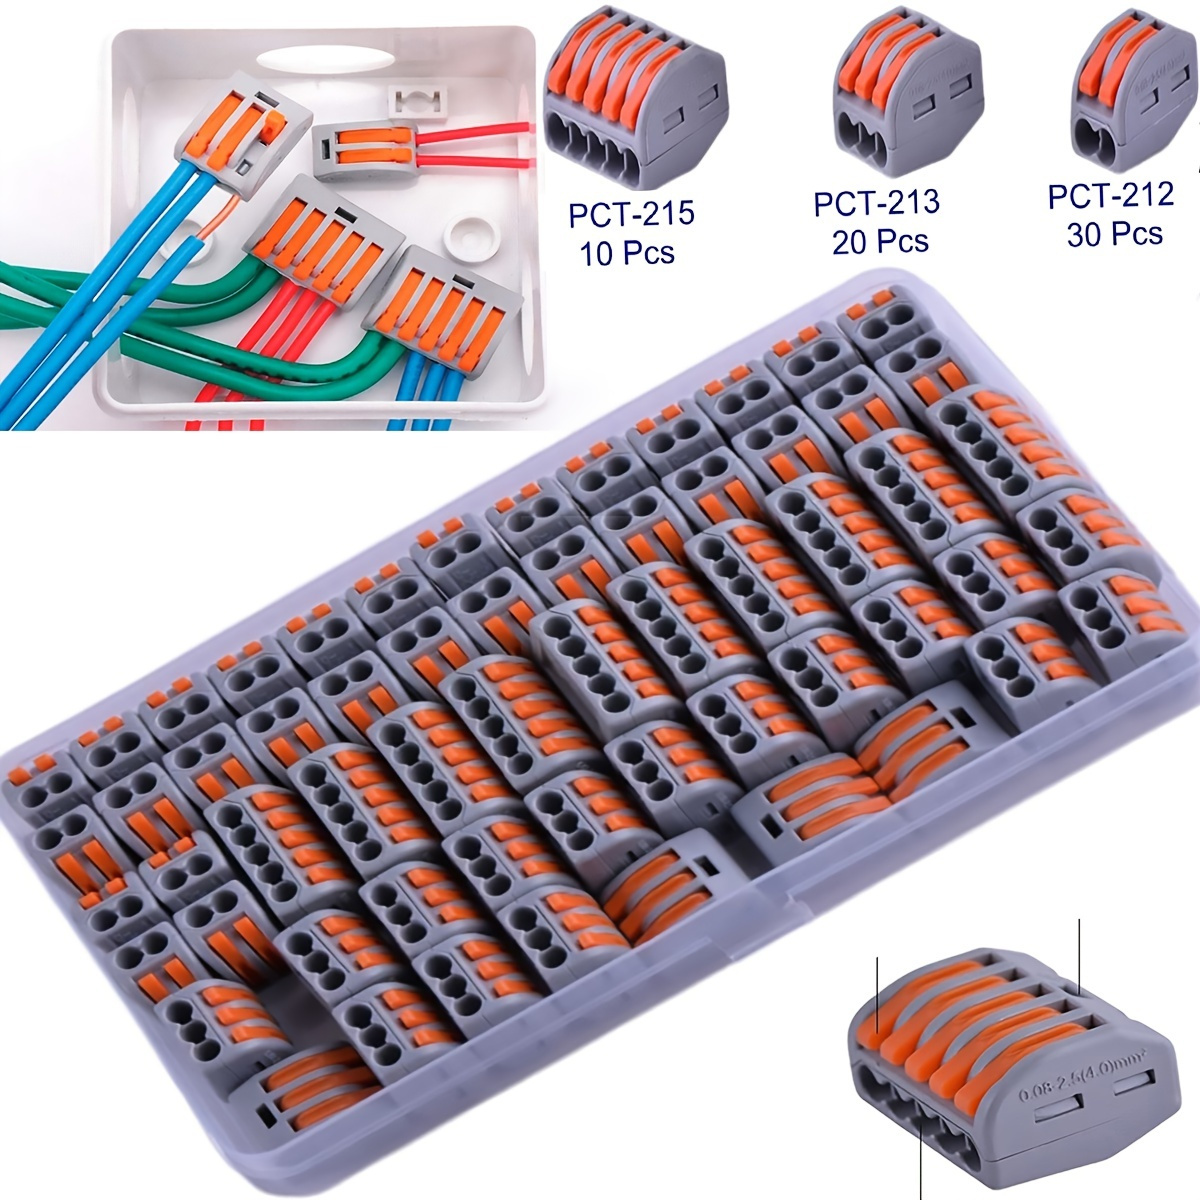 60pcs Wire Connectors For PCT-212/PCT-213/PCT-215 By Ofone. The 60PCS  Compact Splice Wire Connector Set Includes 2/3/5 Ports With A Storage Box